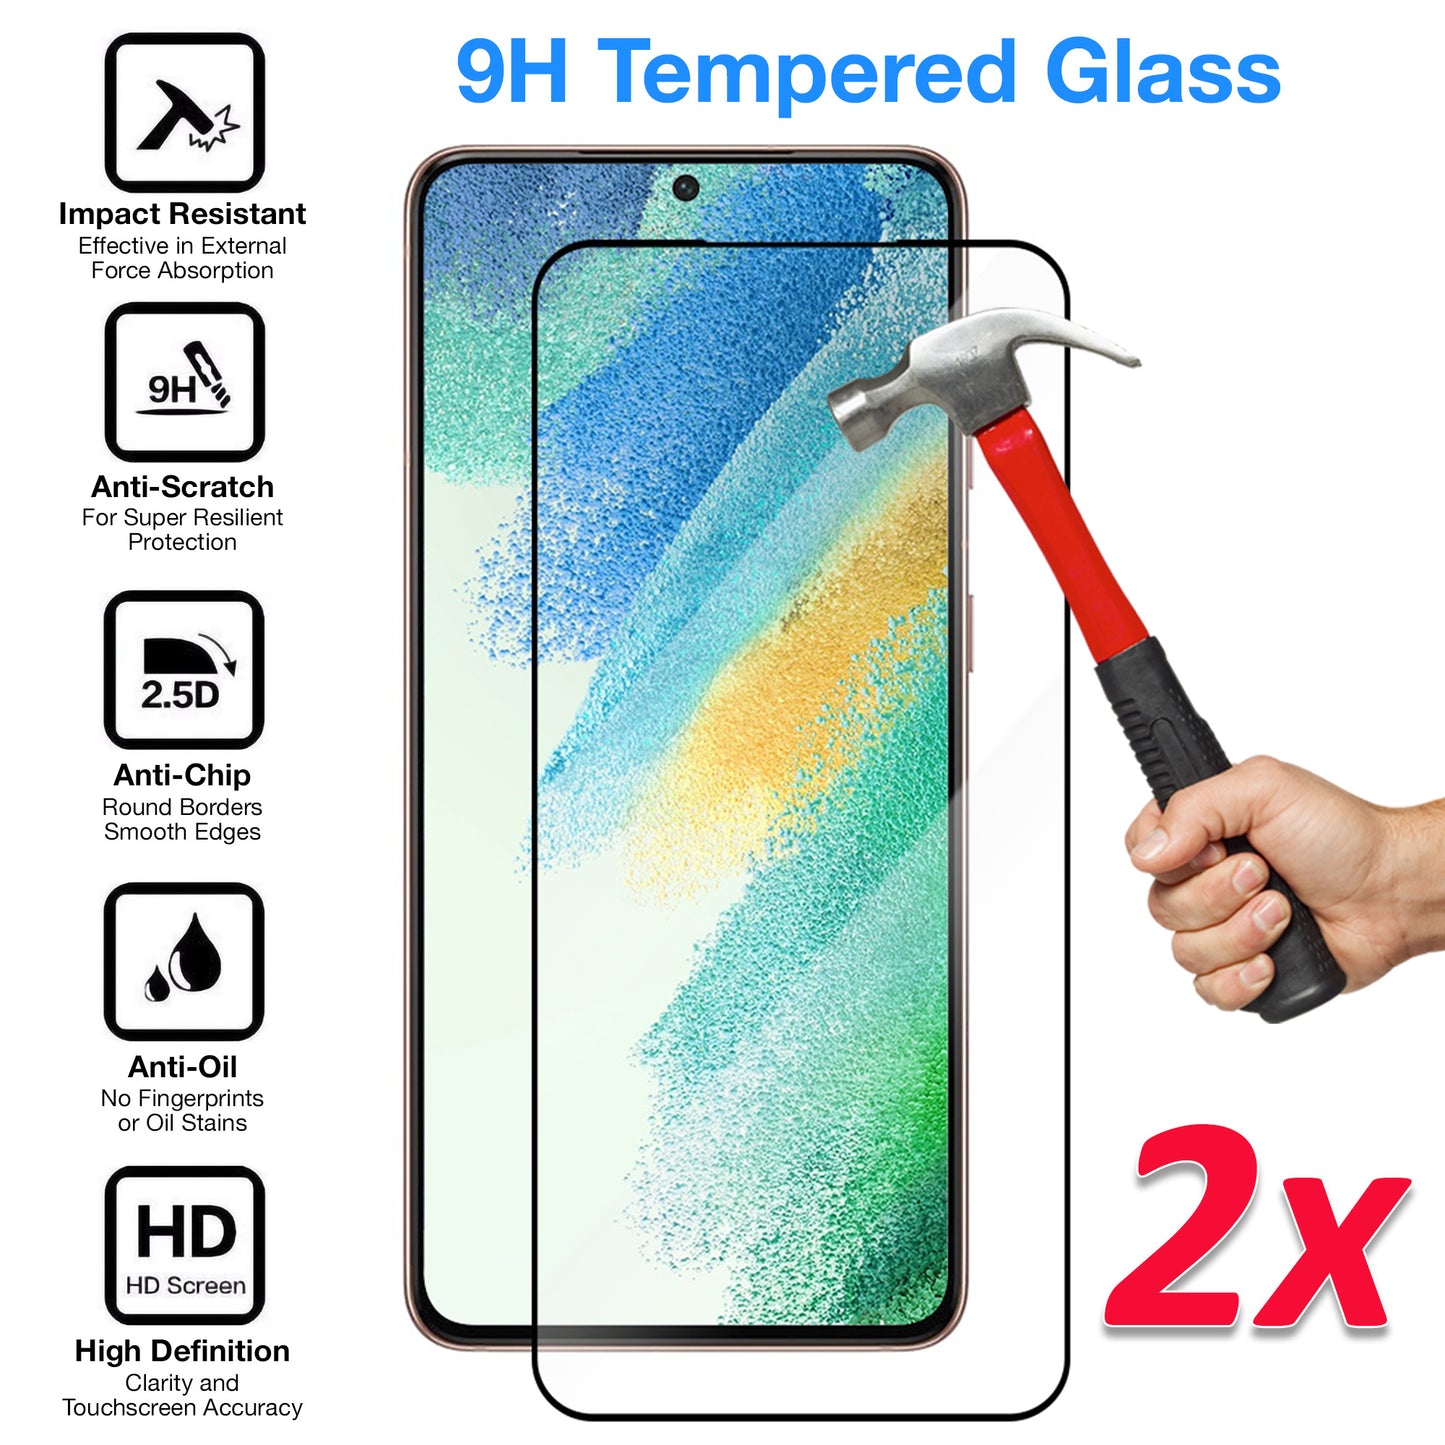 [2 Pack] MEZON Full Coverage Samsung Galaxy S22 5G Tempered Glass Crystal Clear Premium 9H HD Screen Protector (S22, 9H Full)